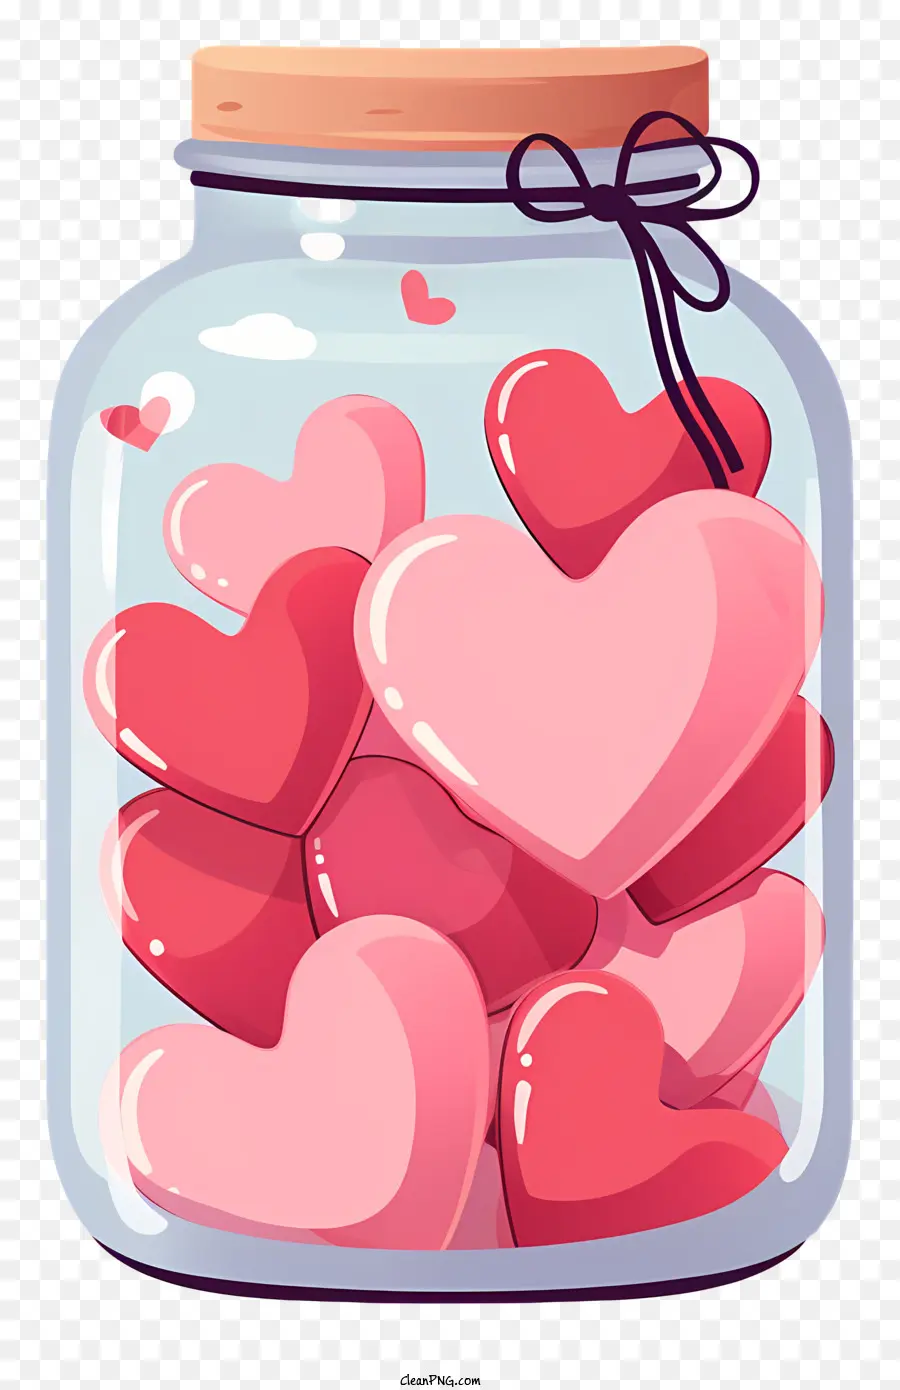 mason jar with heart transparent glass jar pink heart-shaped candy black background bendable handle